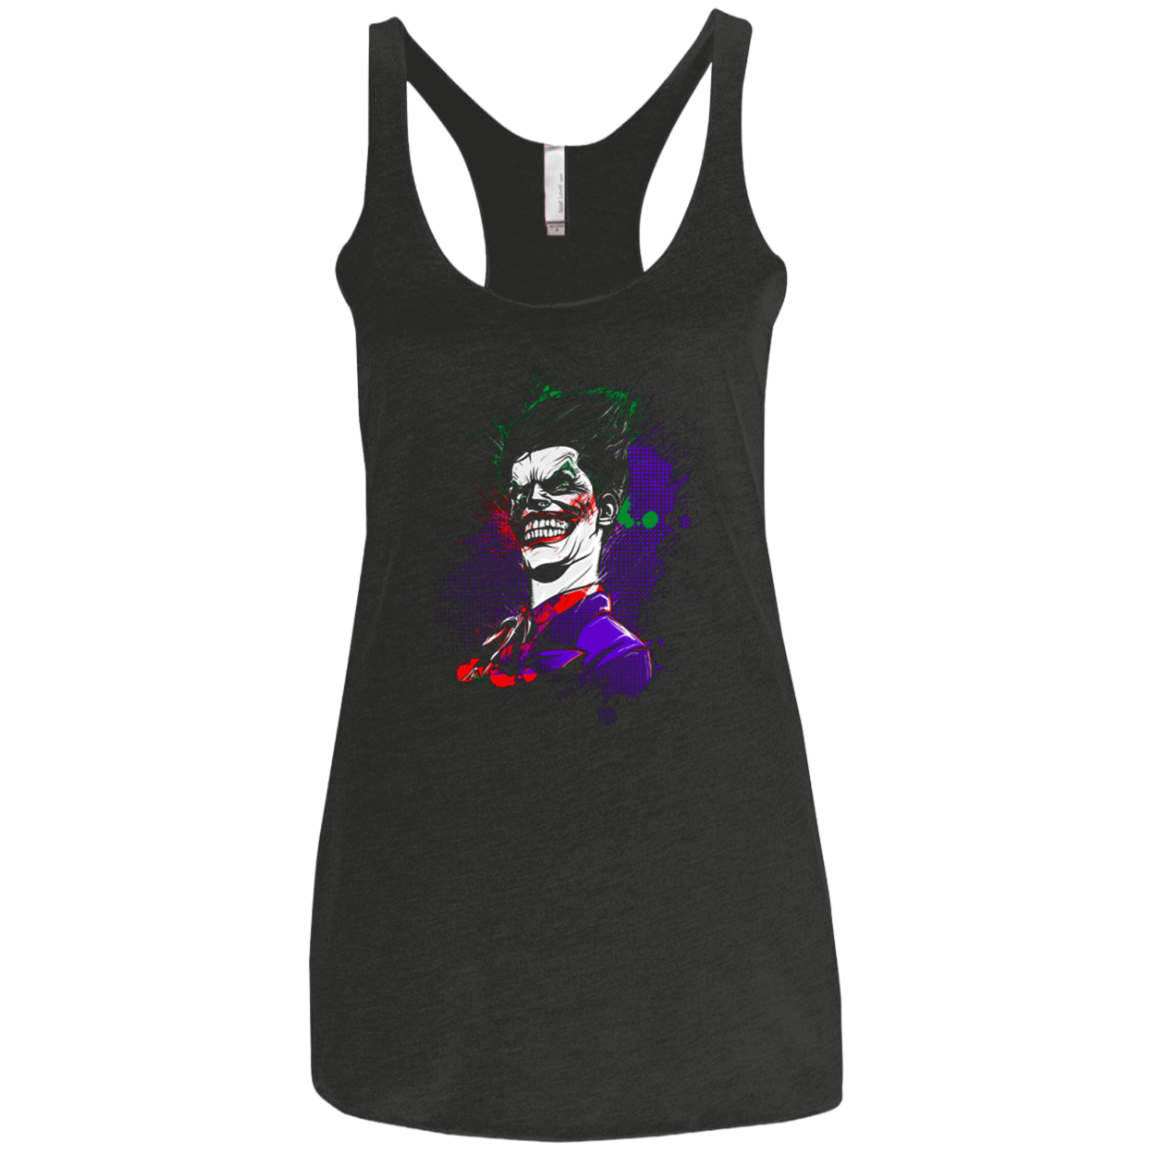 Why so Serious Women's Triblend Racerback Tank